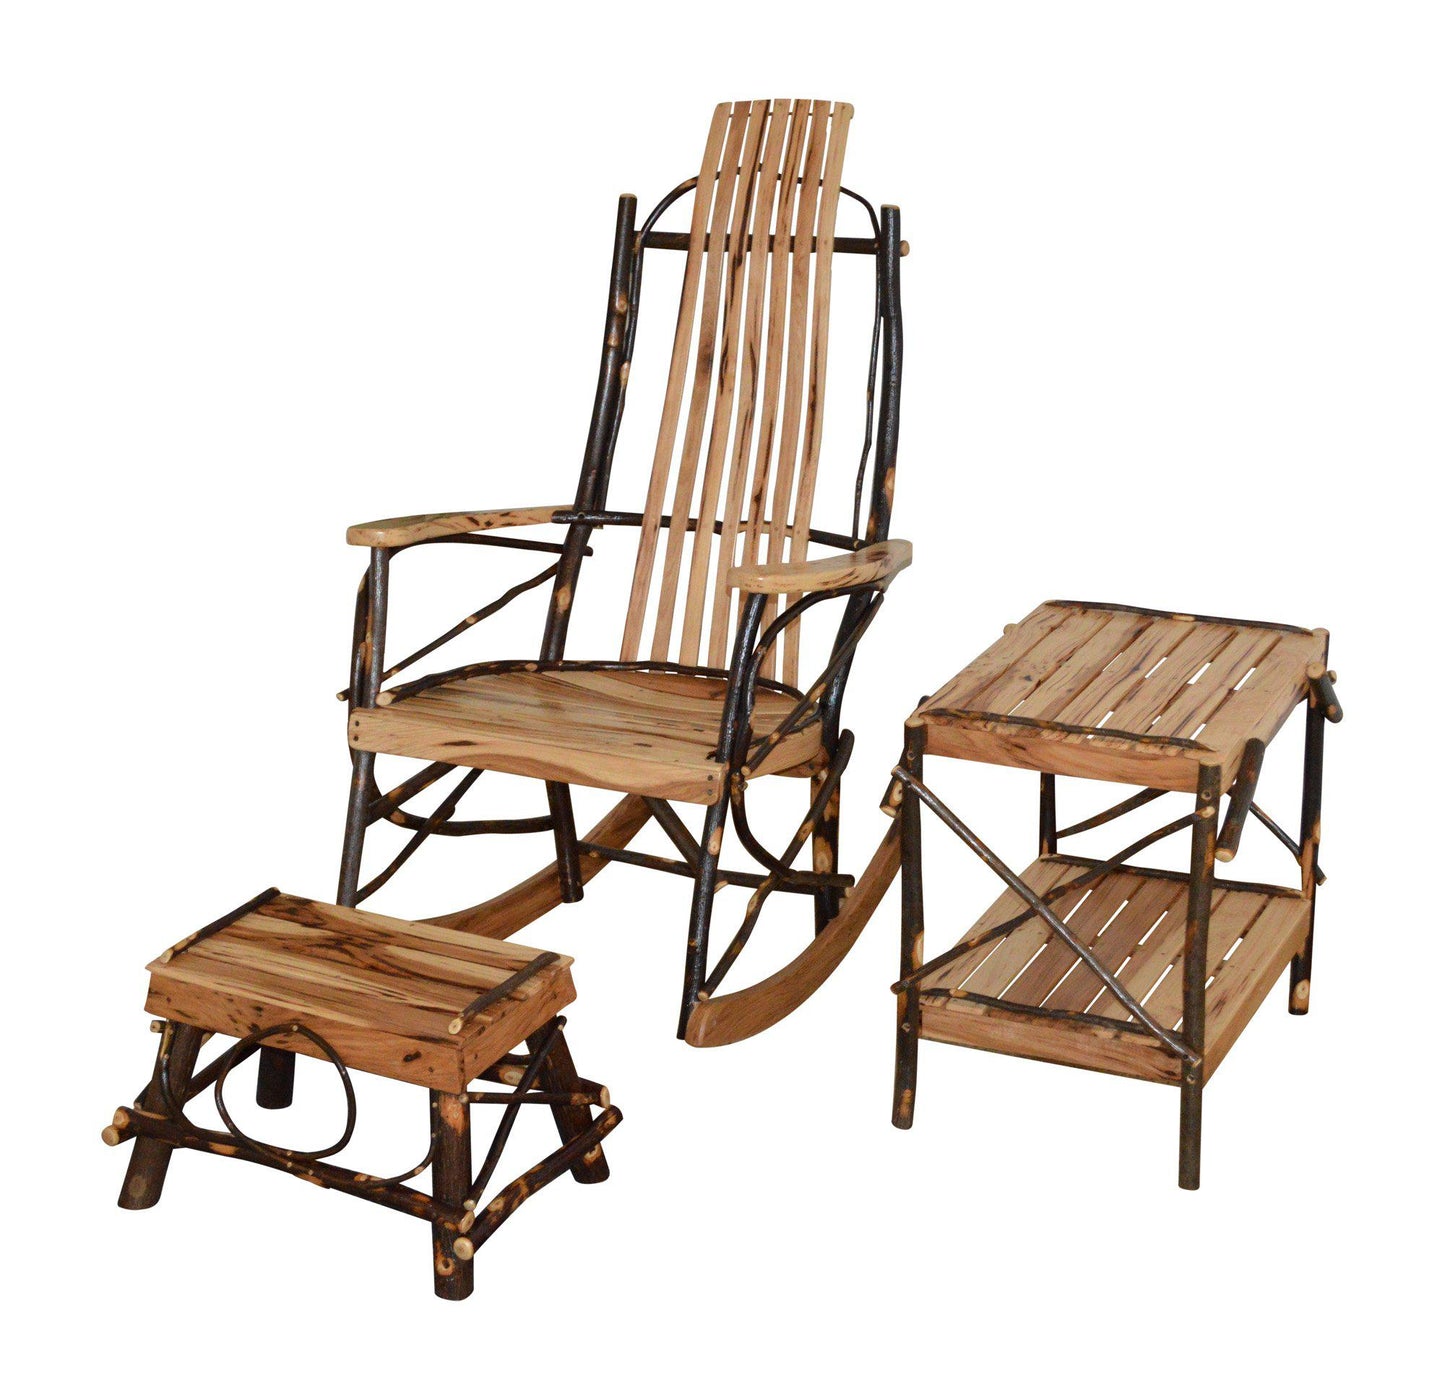 A&L Furniture Co. Amish Bentwood 7-Slat Hickory Rocking Chair with Foot Stool and End Table Set - LEAD TIME TO SHIP 4 WEEKS OR LESS